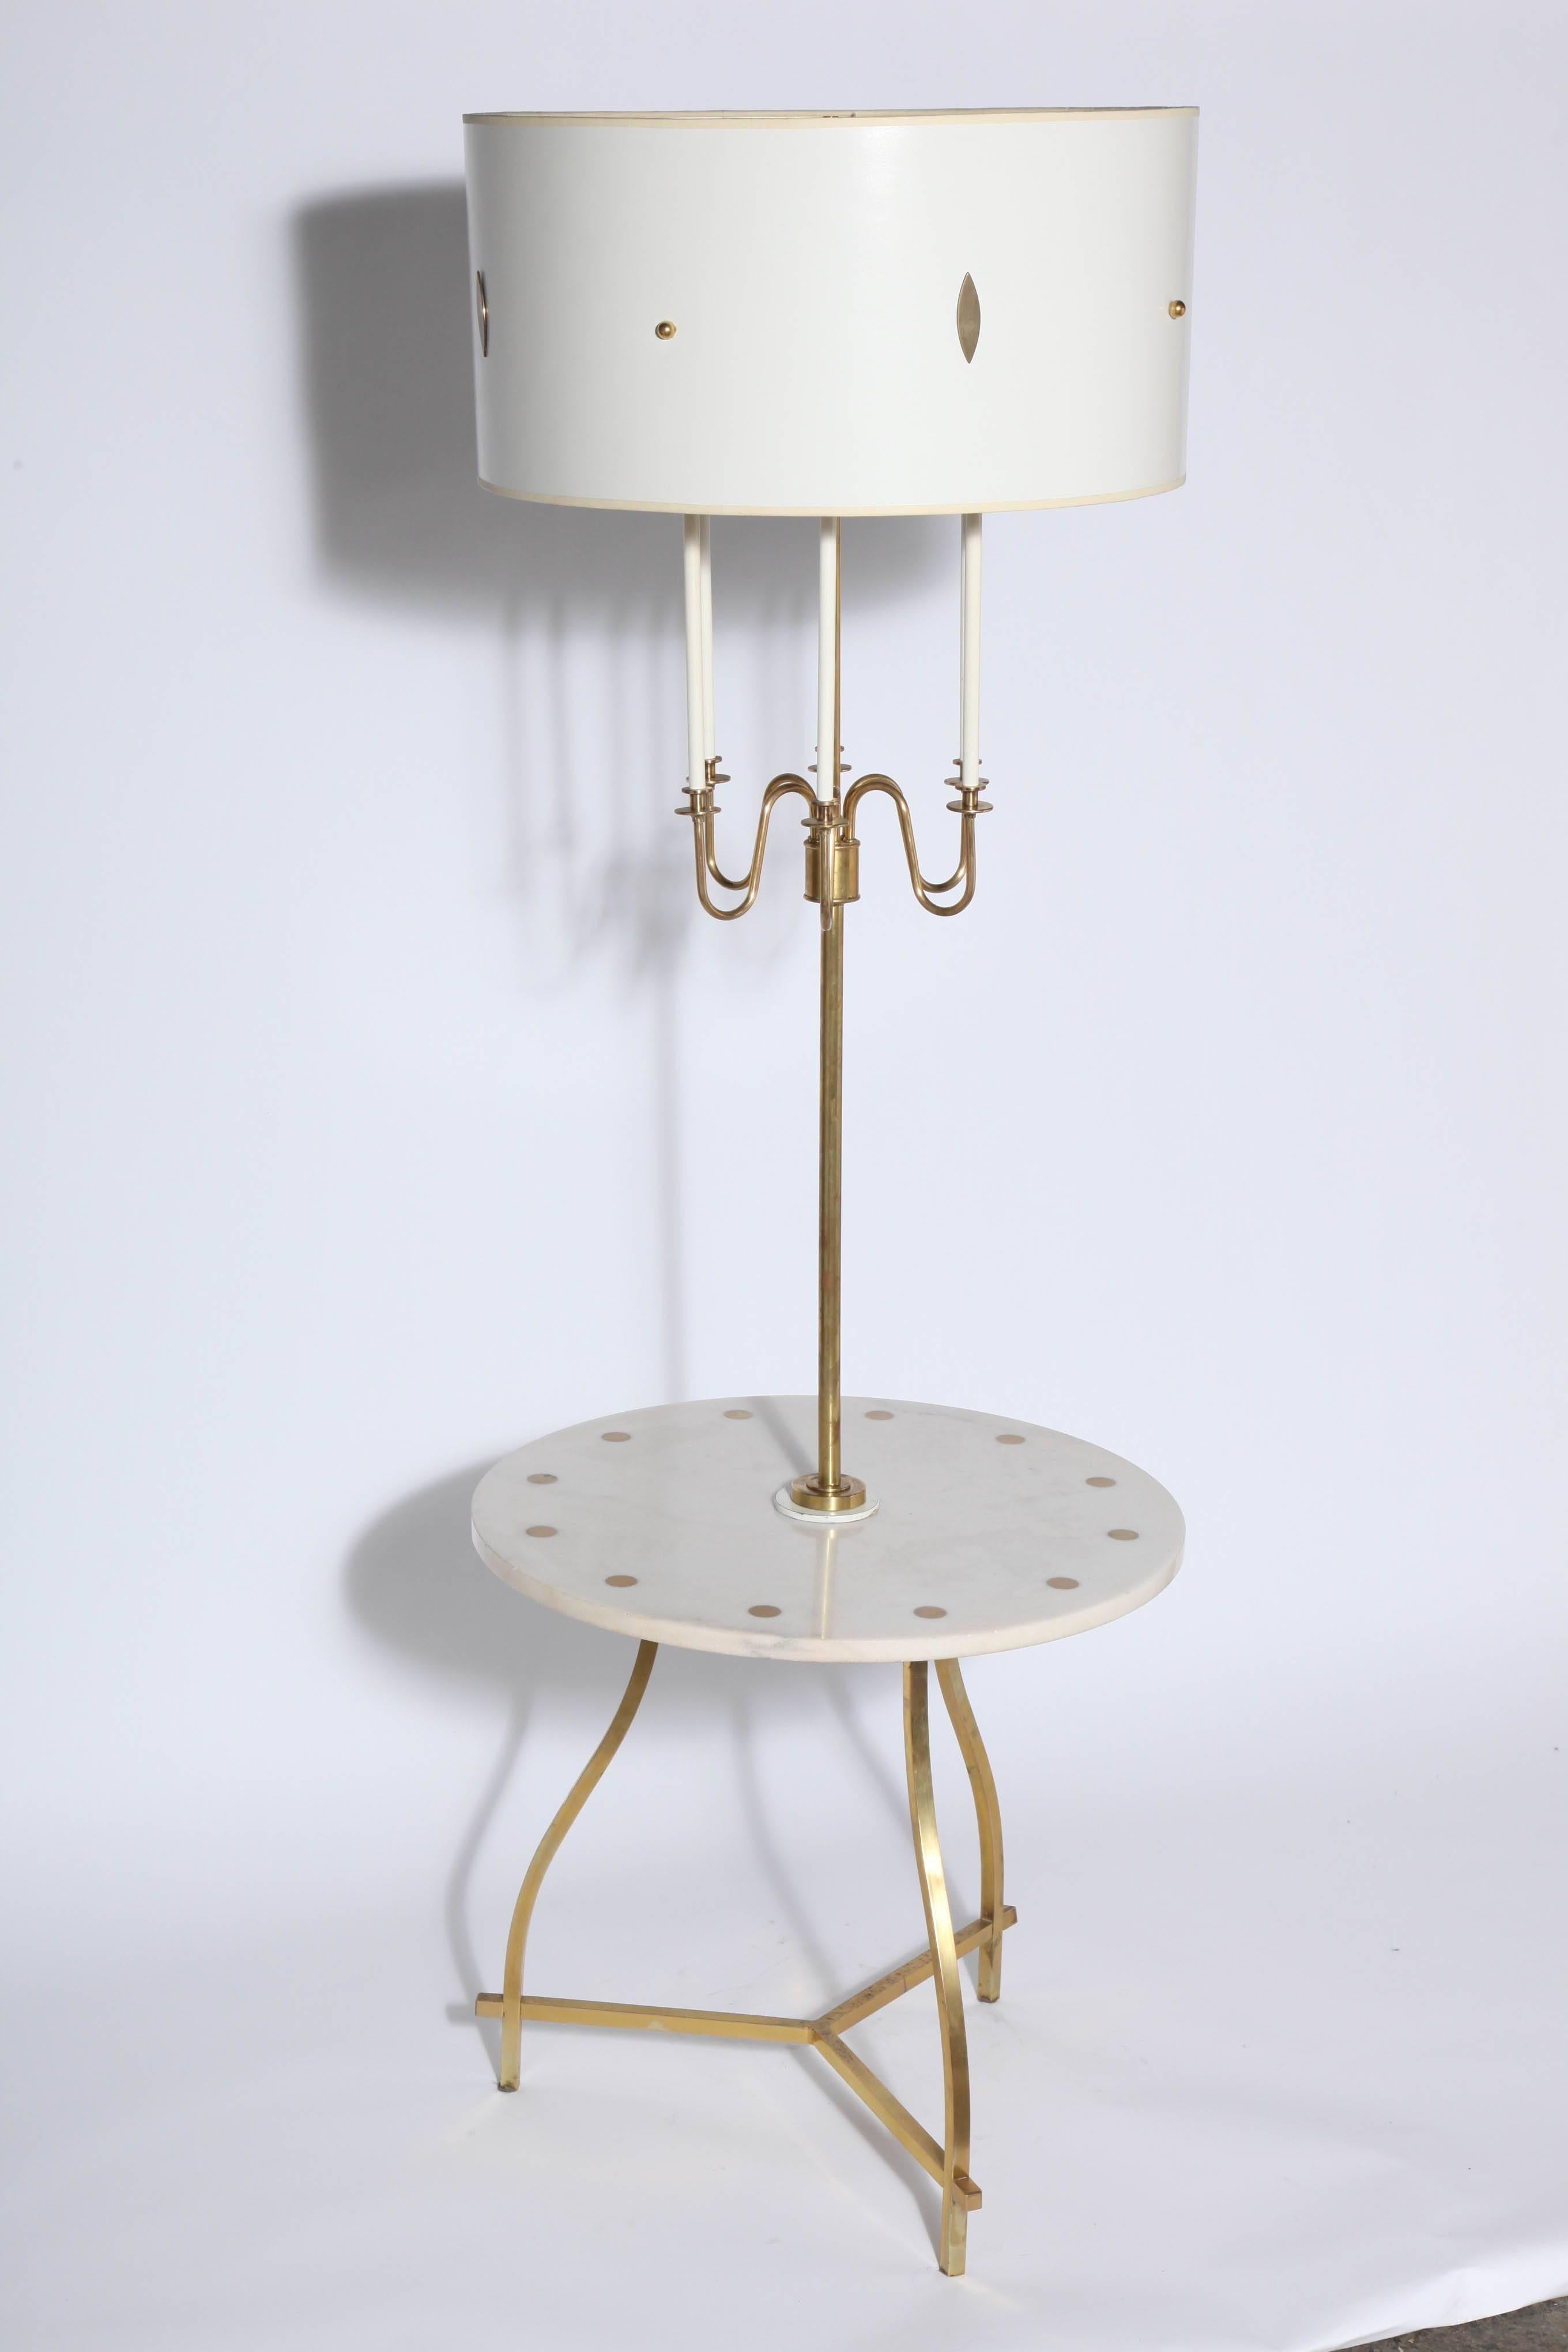 Tommi Parzinger style White and Brass Tiered Candlestick Floor Lamp with Marble Side Table.  Featuring a Brass tripod leg framework, round 22.5D White Marble Side Table, round Brass button inlay, six Brass candlesticks, White enamel candle style